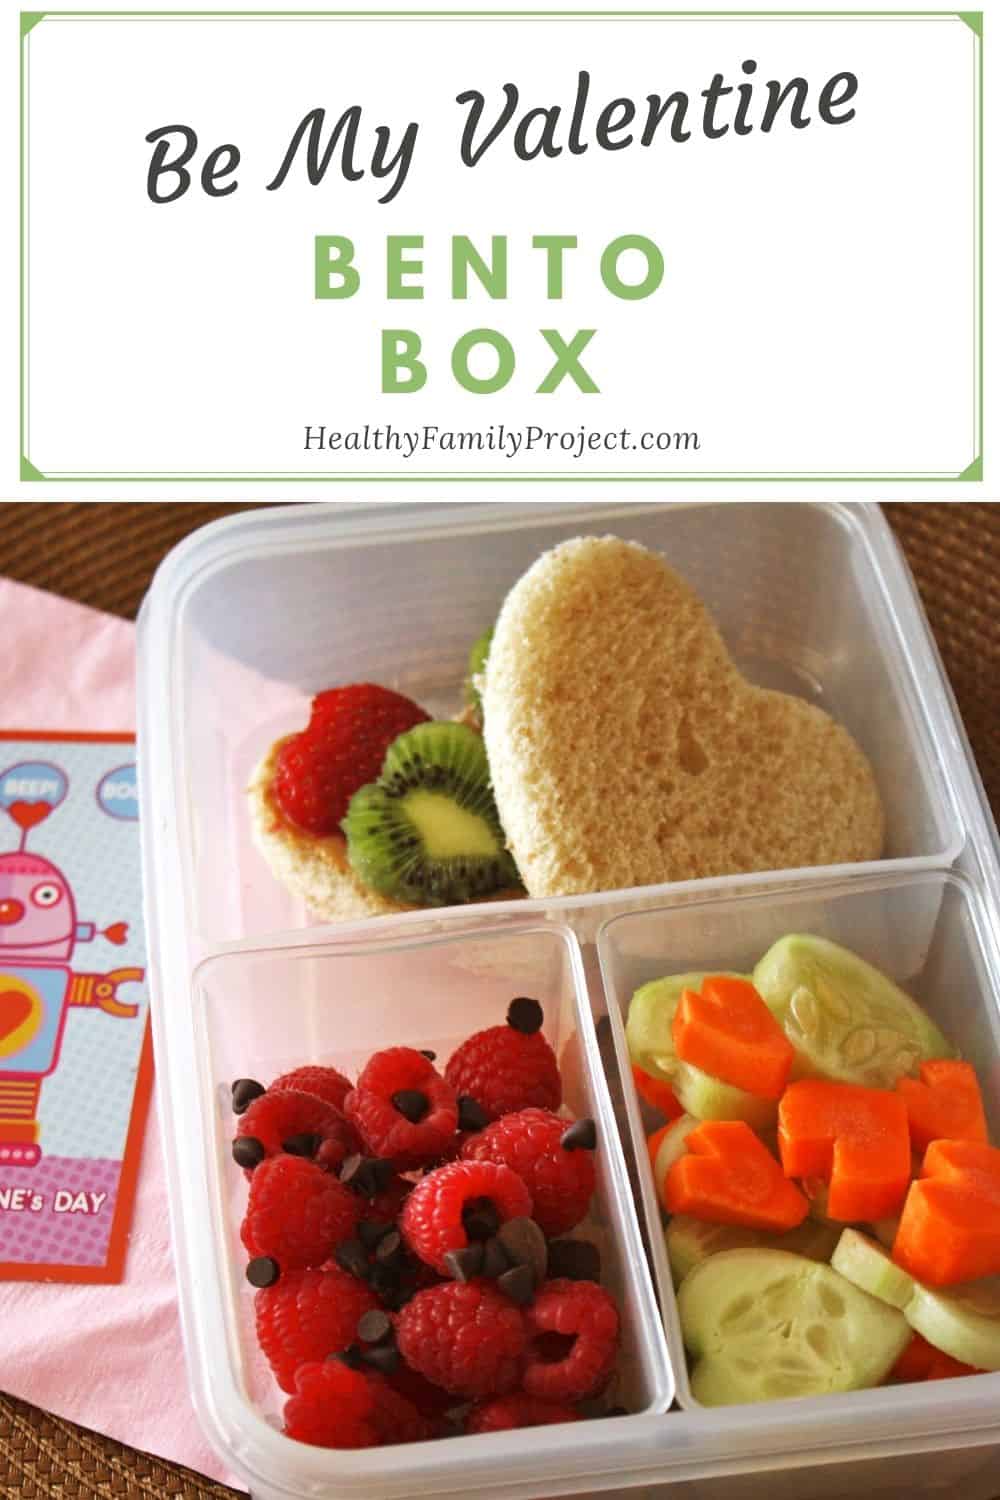 How to make A Valentine's Day themed bento box 